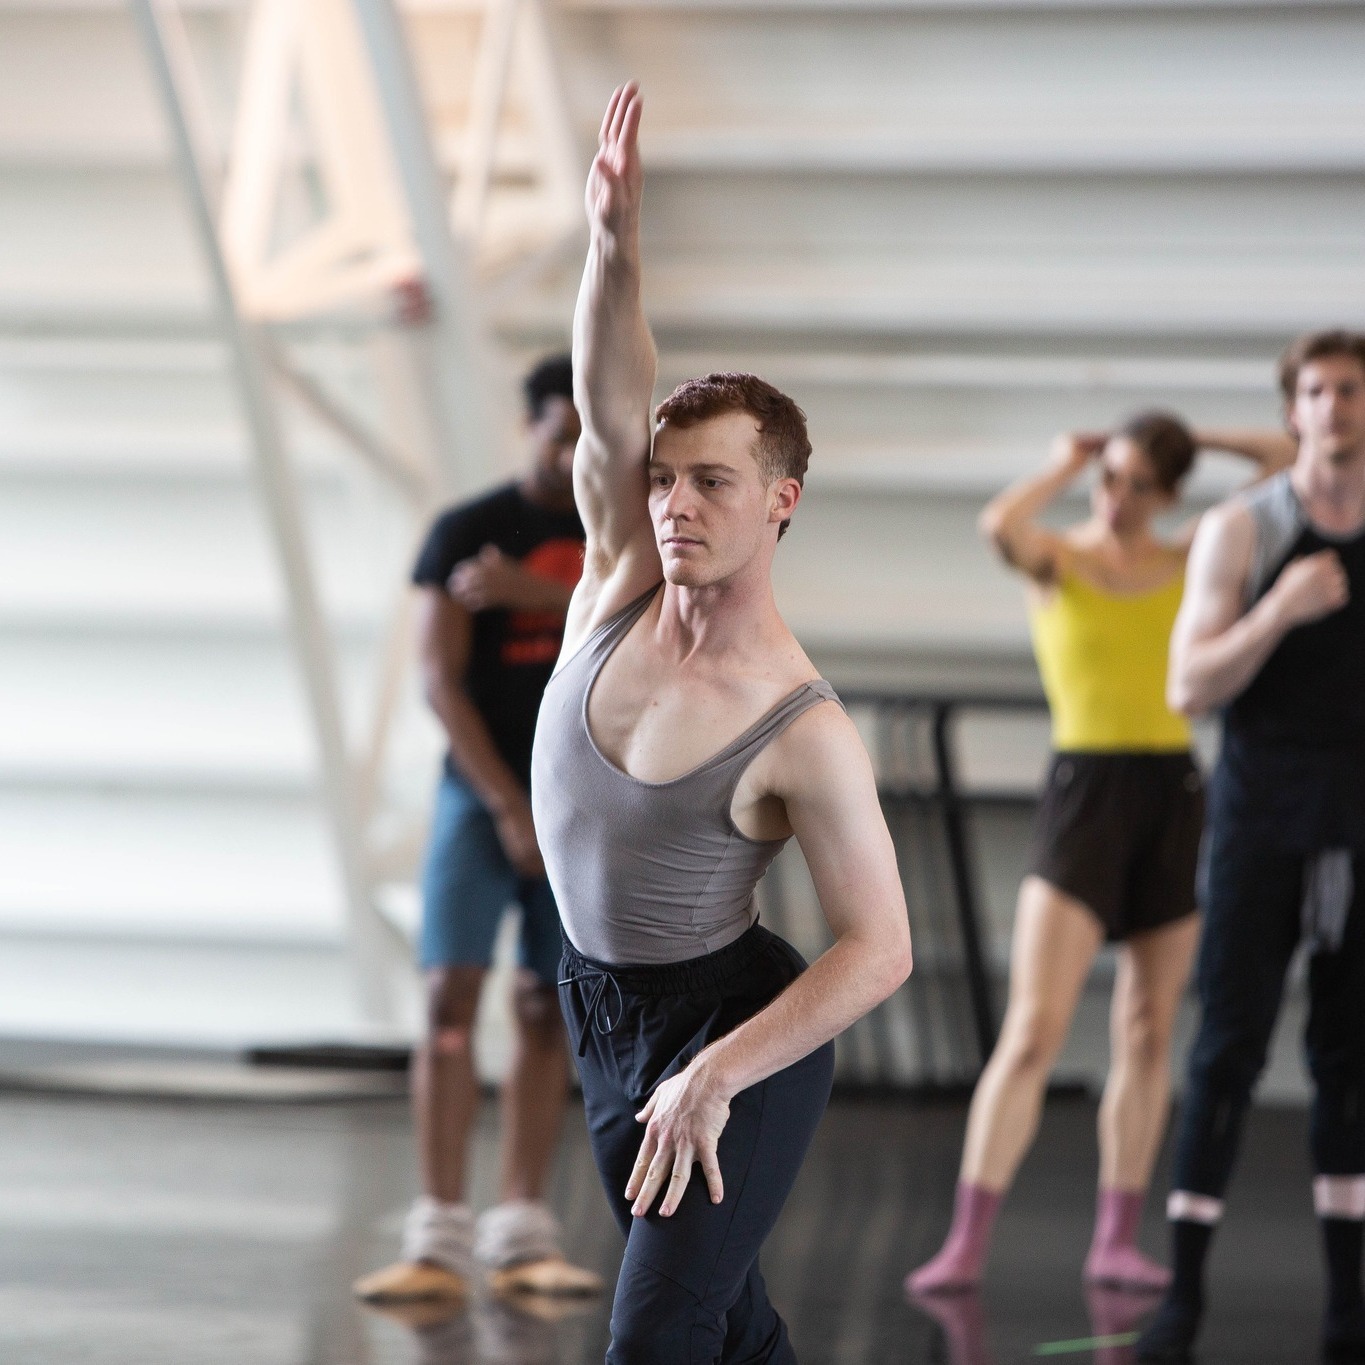 A ballet dancer in a grey top extends an arm overhead. We can see other dancers surrounded in the background.